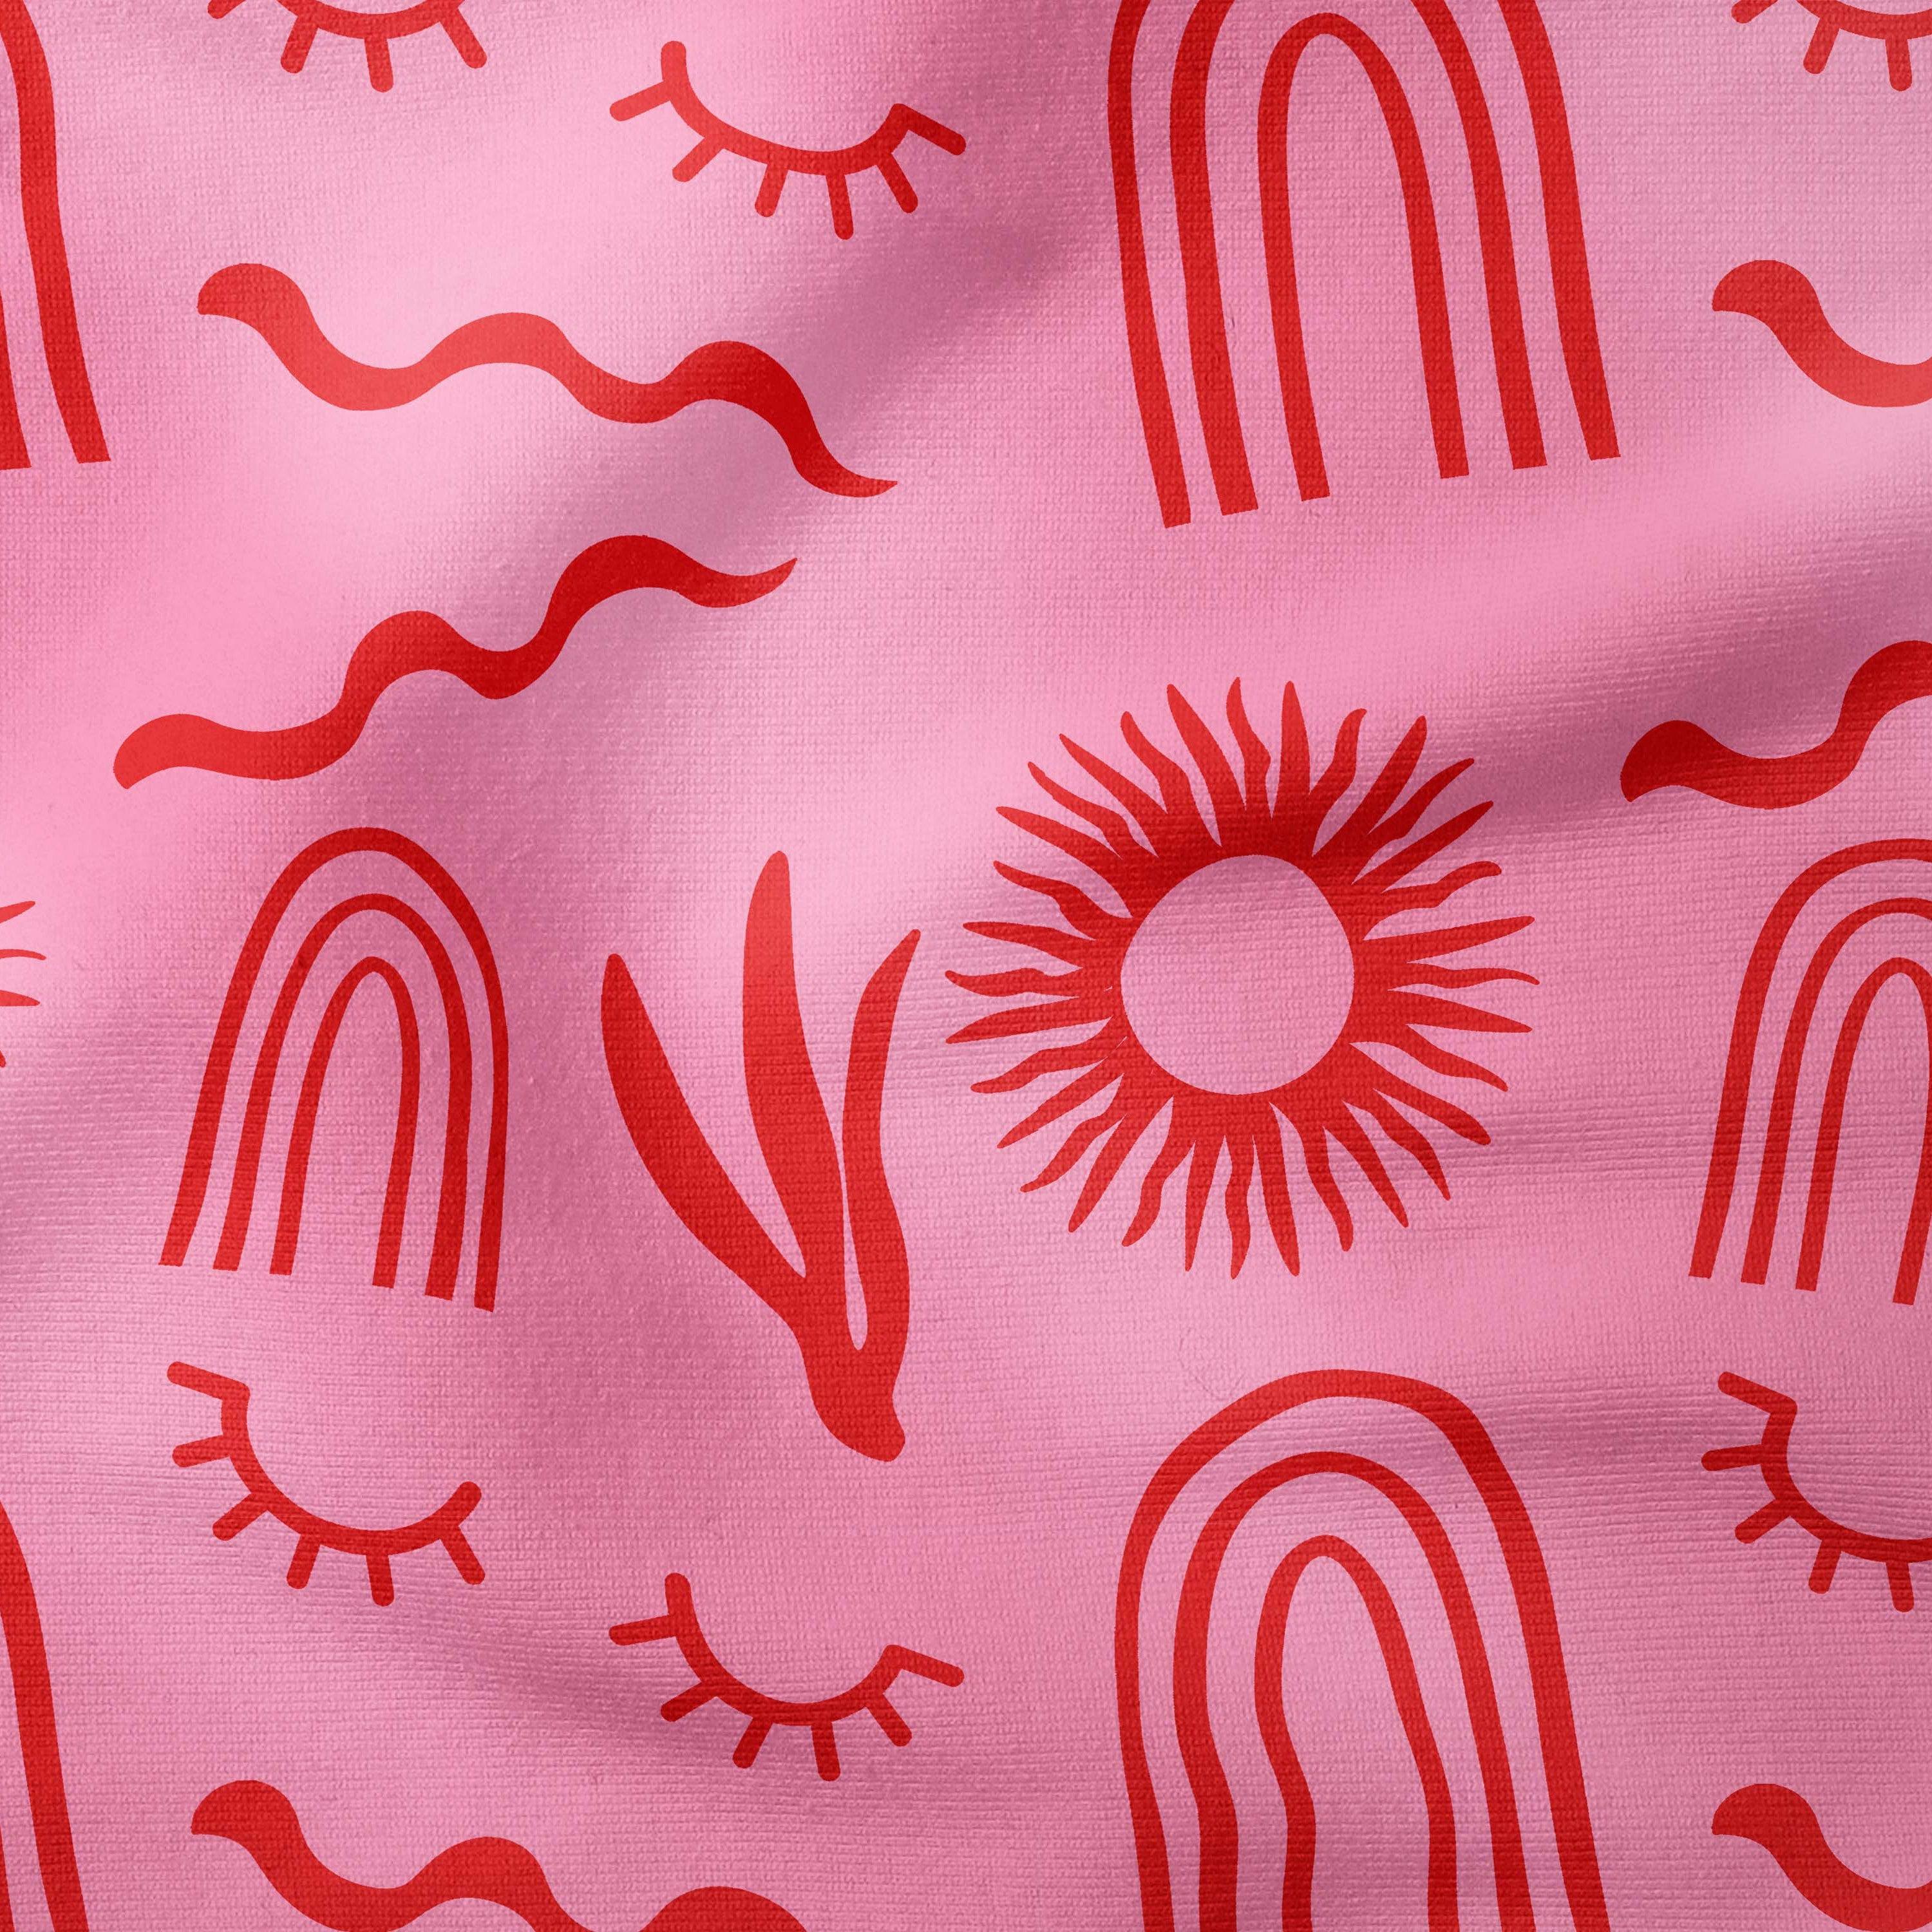 Abstract Shapes-Art Print Fabric-Melco Fabrics-Red on Pink-Cotton Poplin (110gsm)-Online-Fabric-Shop-Australia